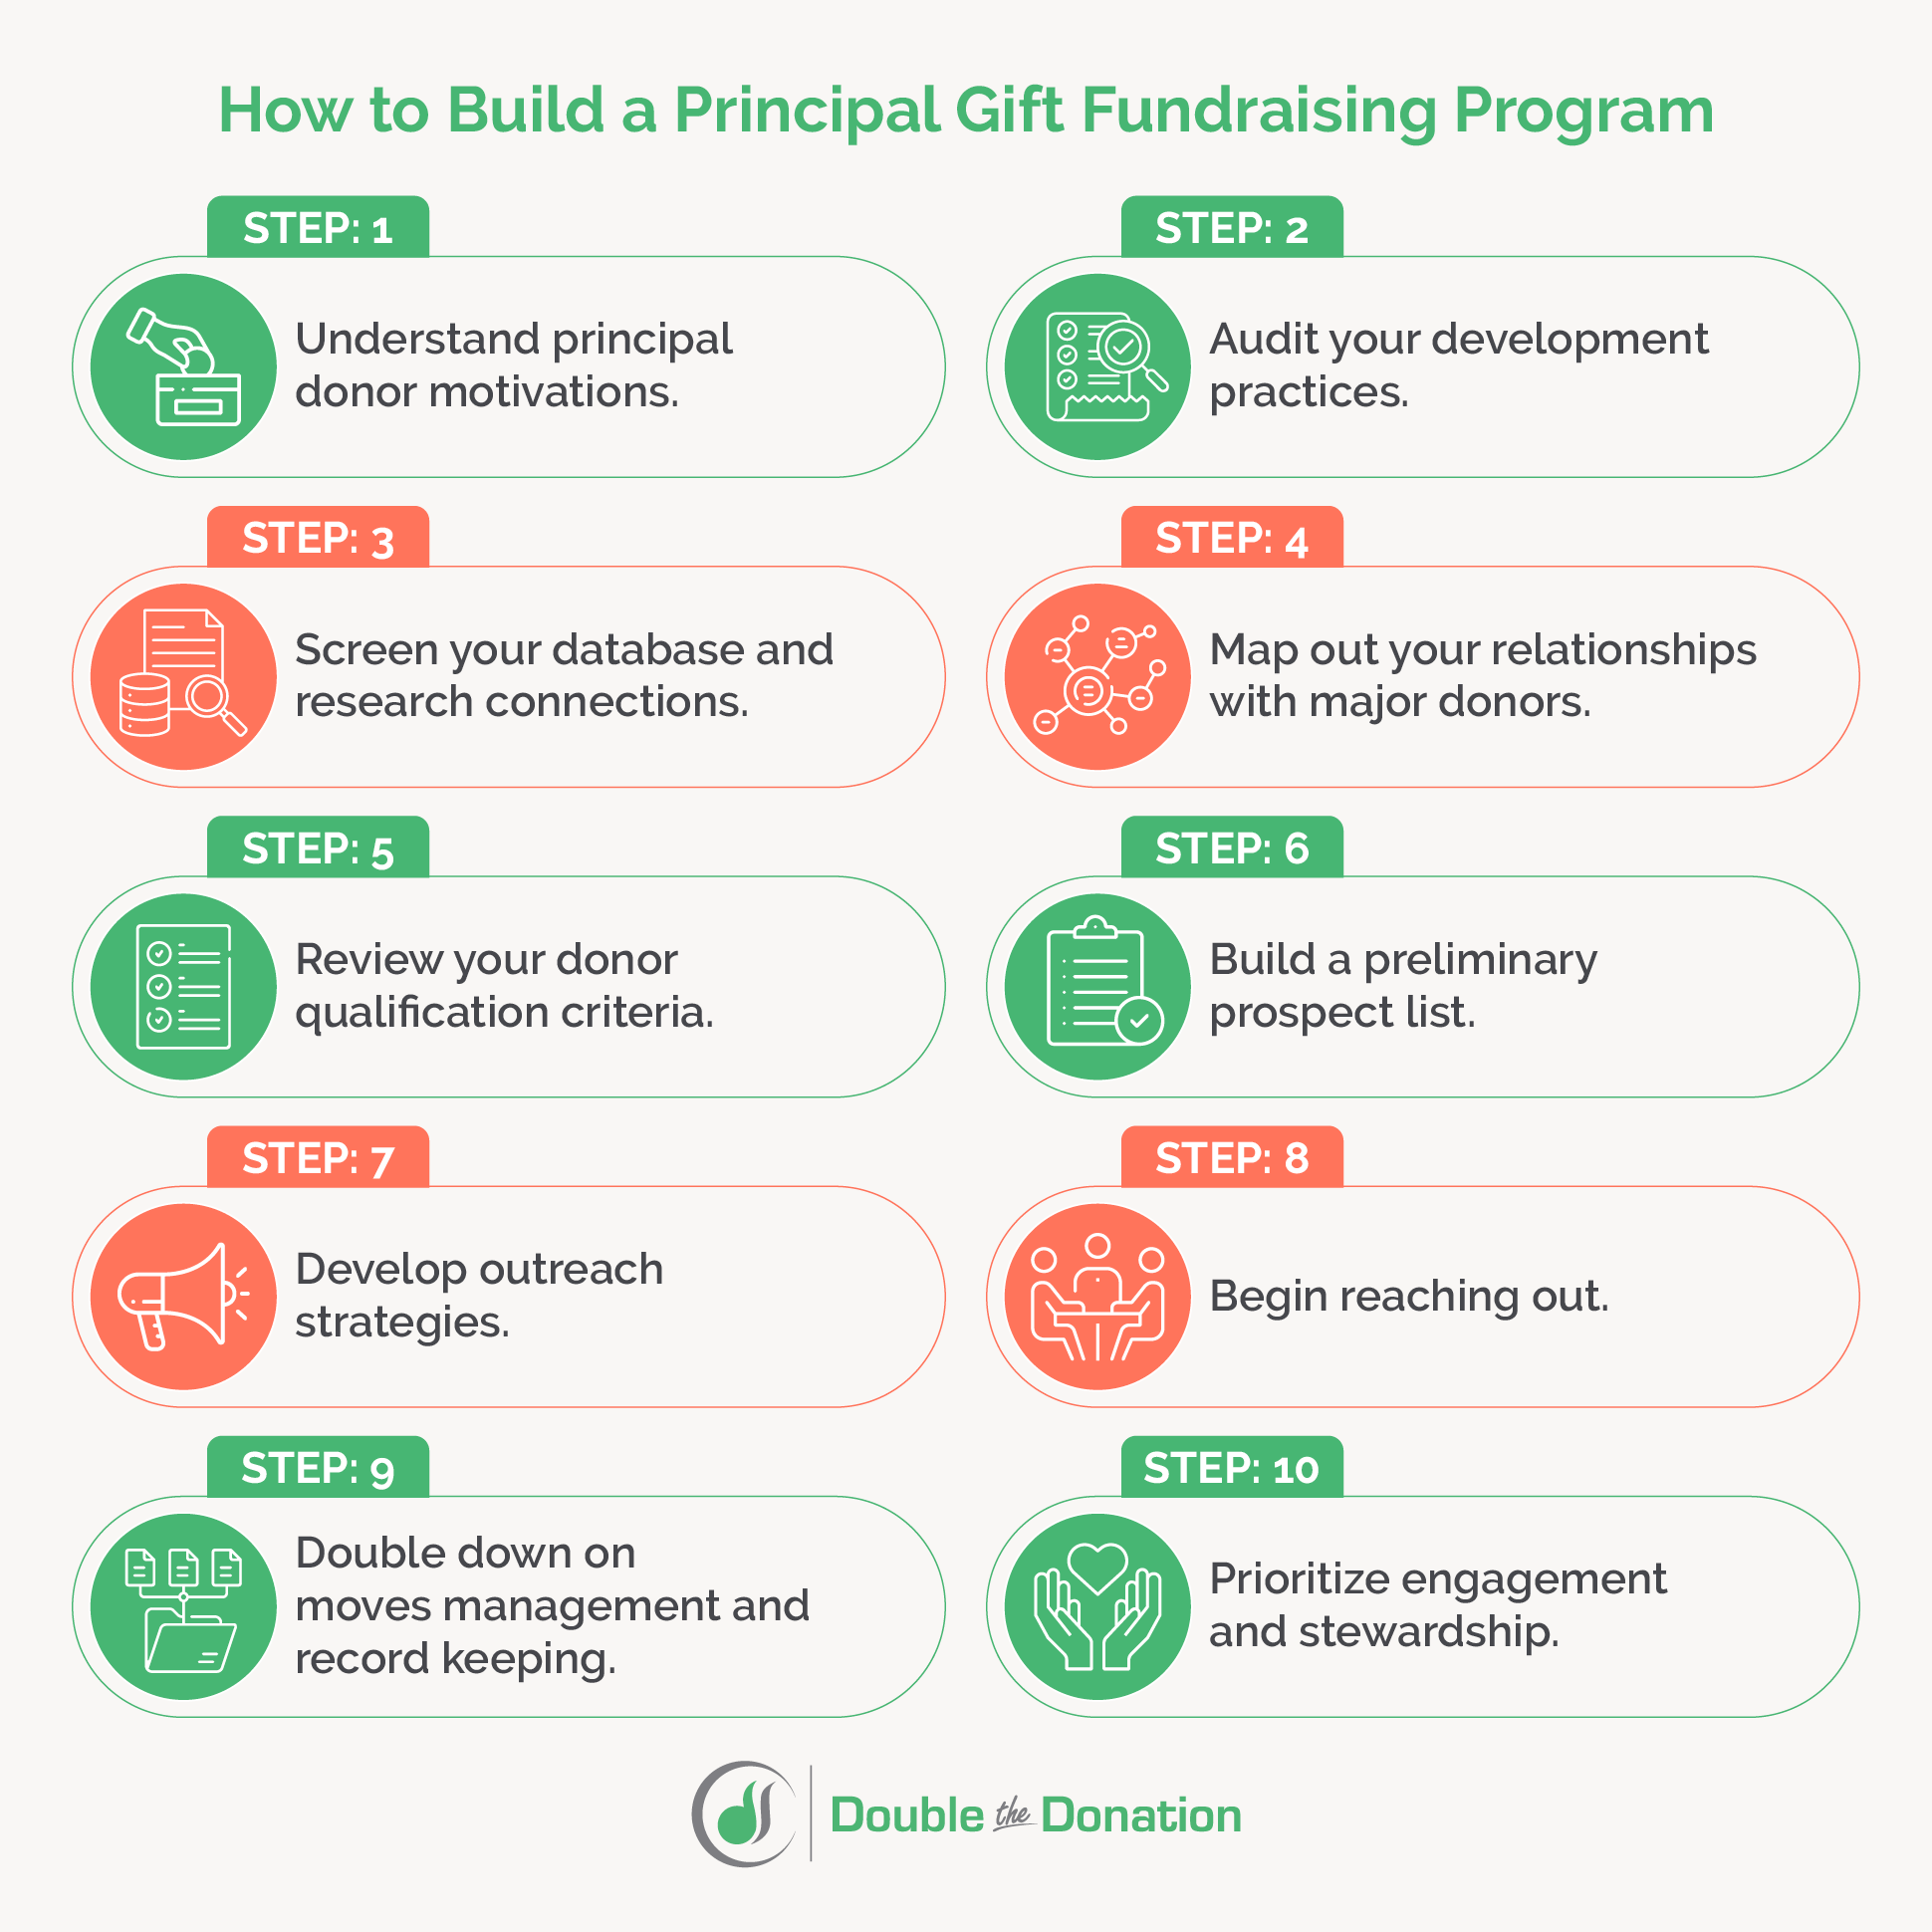 The steps for building a principal gift fundraising program, detailed in the text below